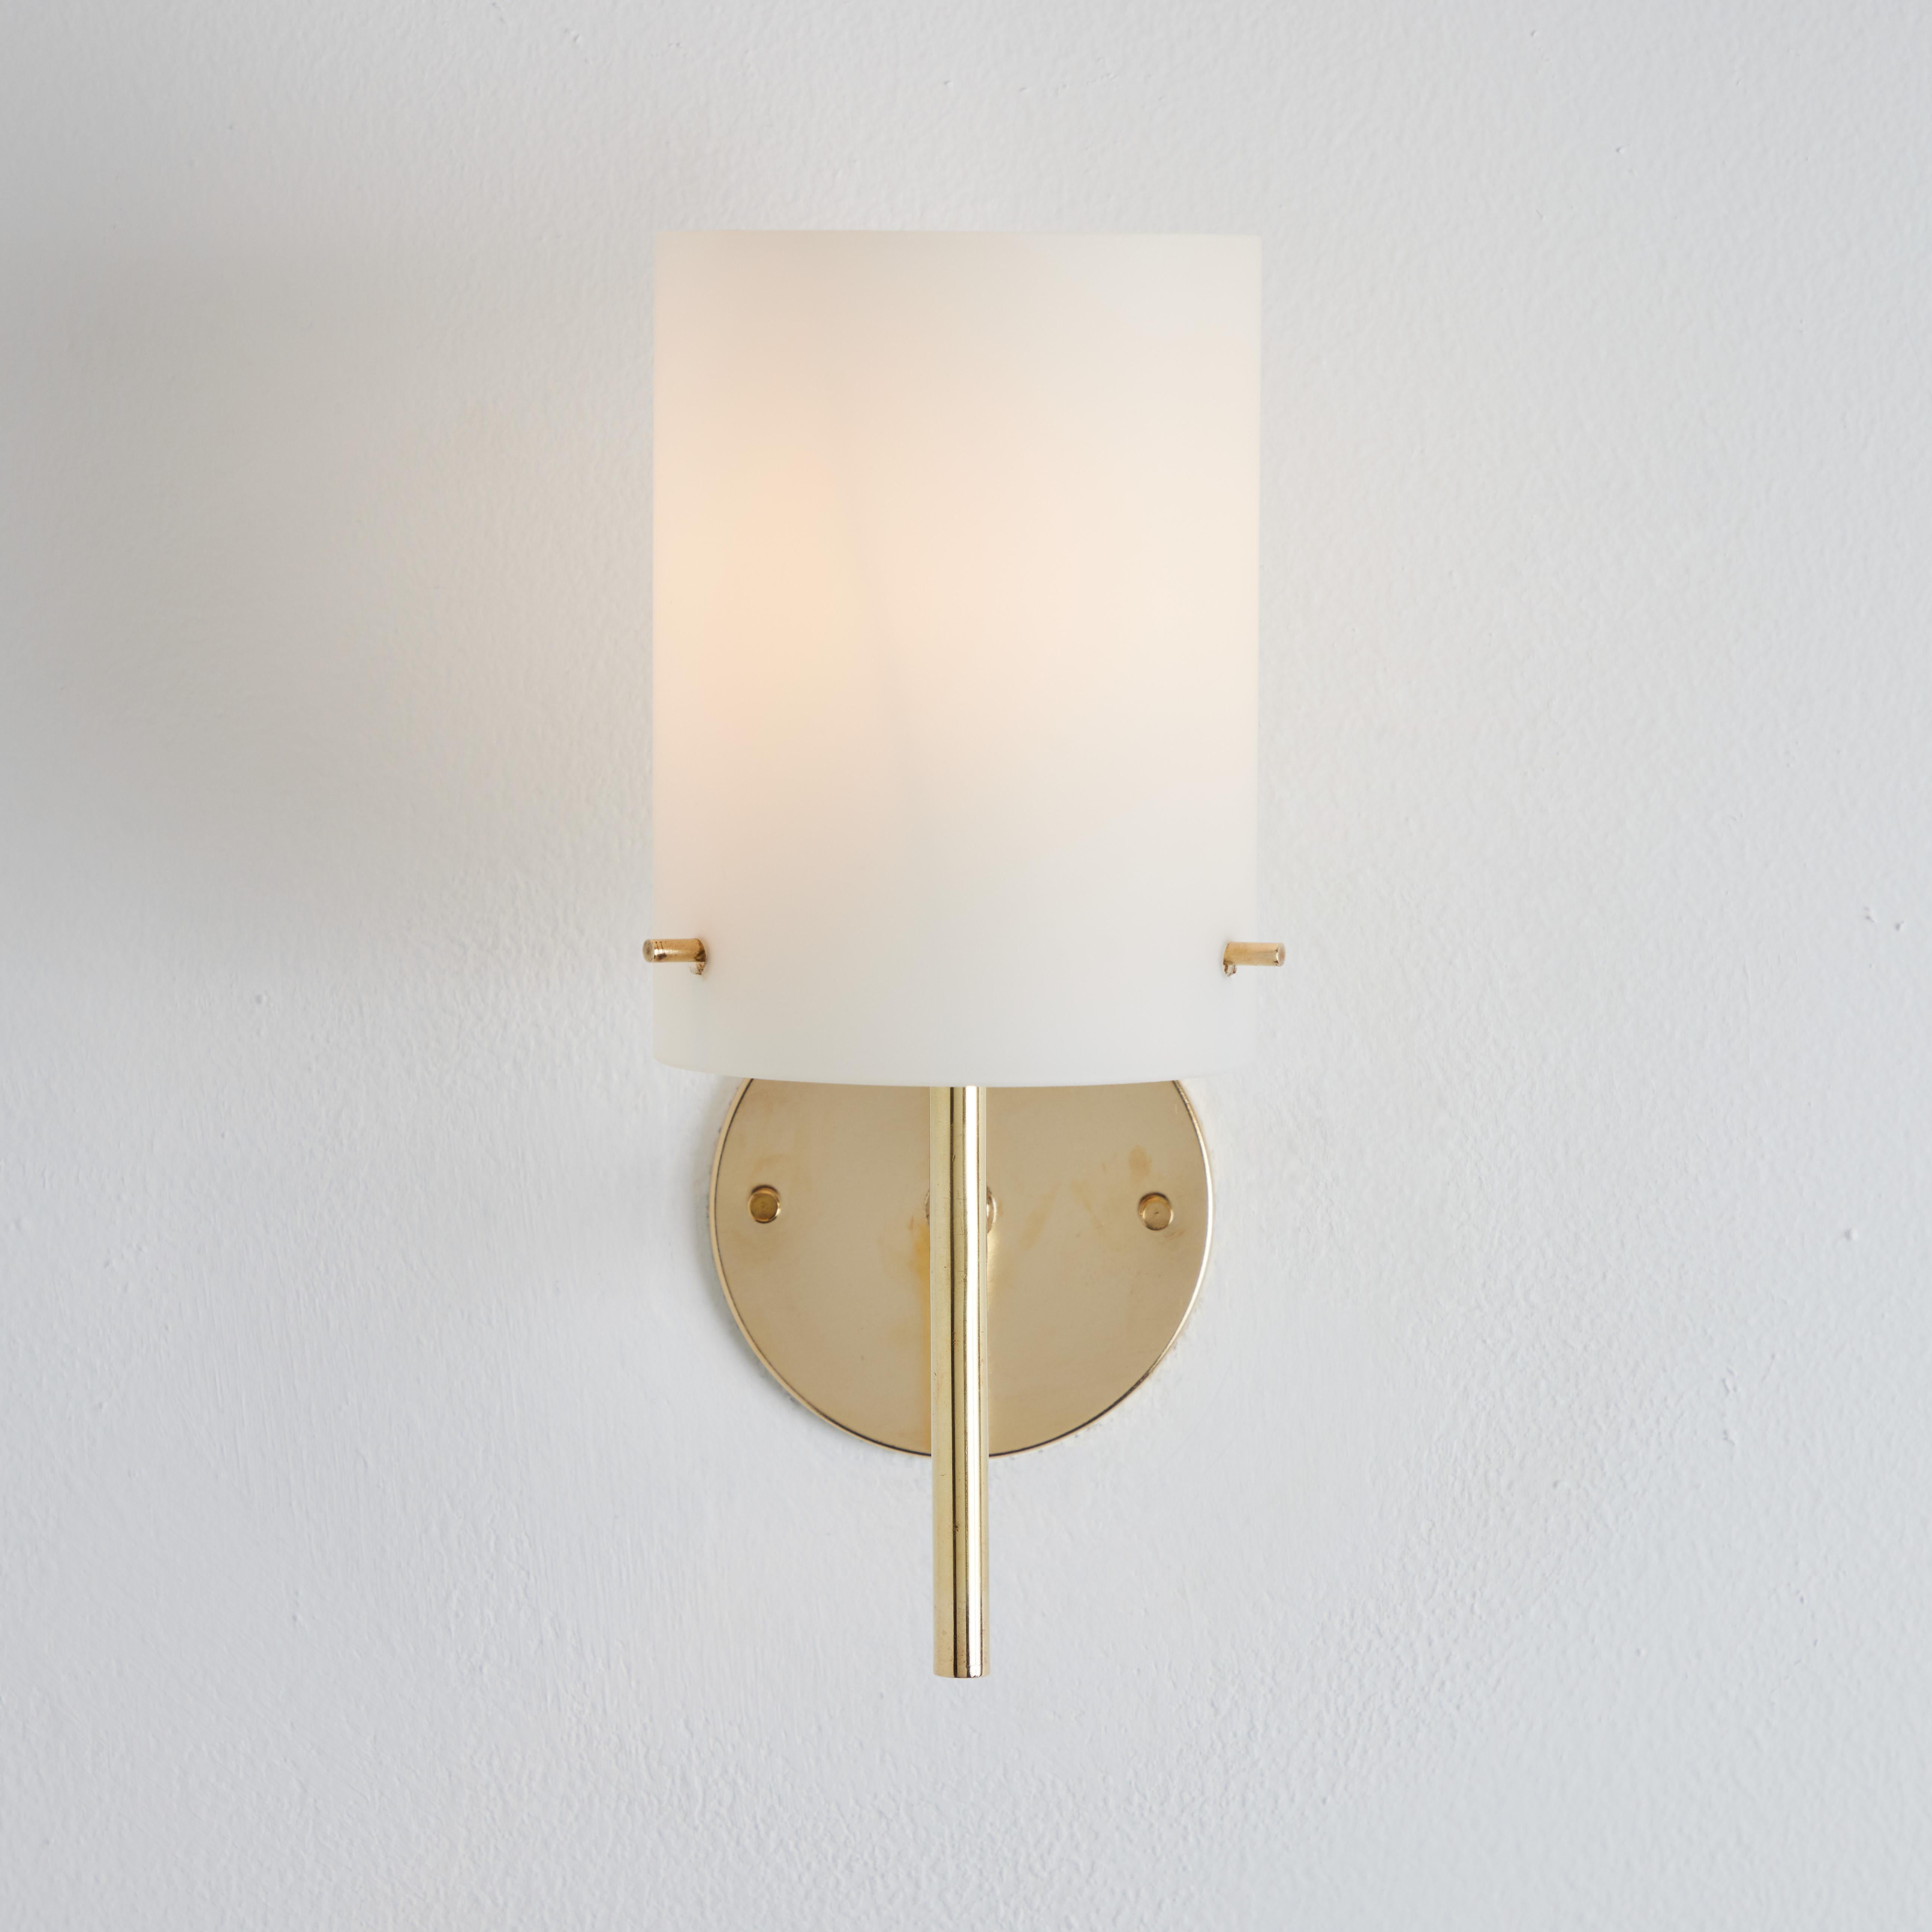 1950s Tito Agnoli Brass & Glass Cylindrical Wall Lamp for O-Luce For Sale 1